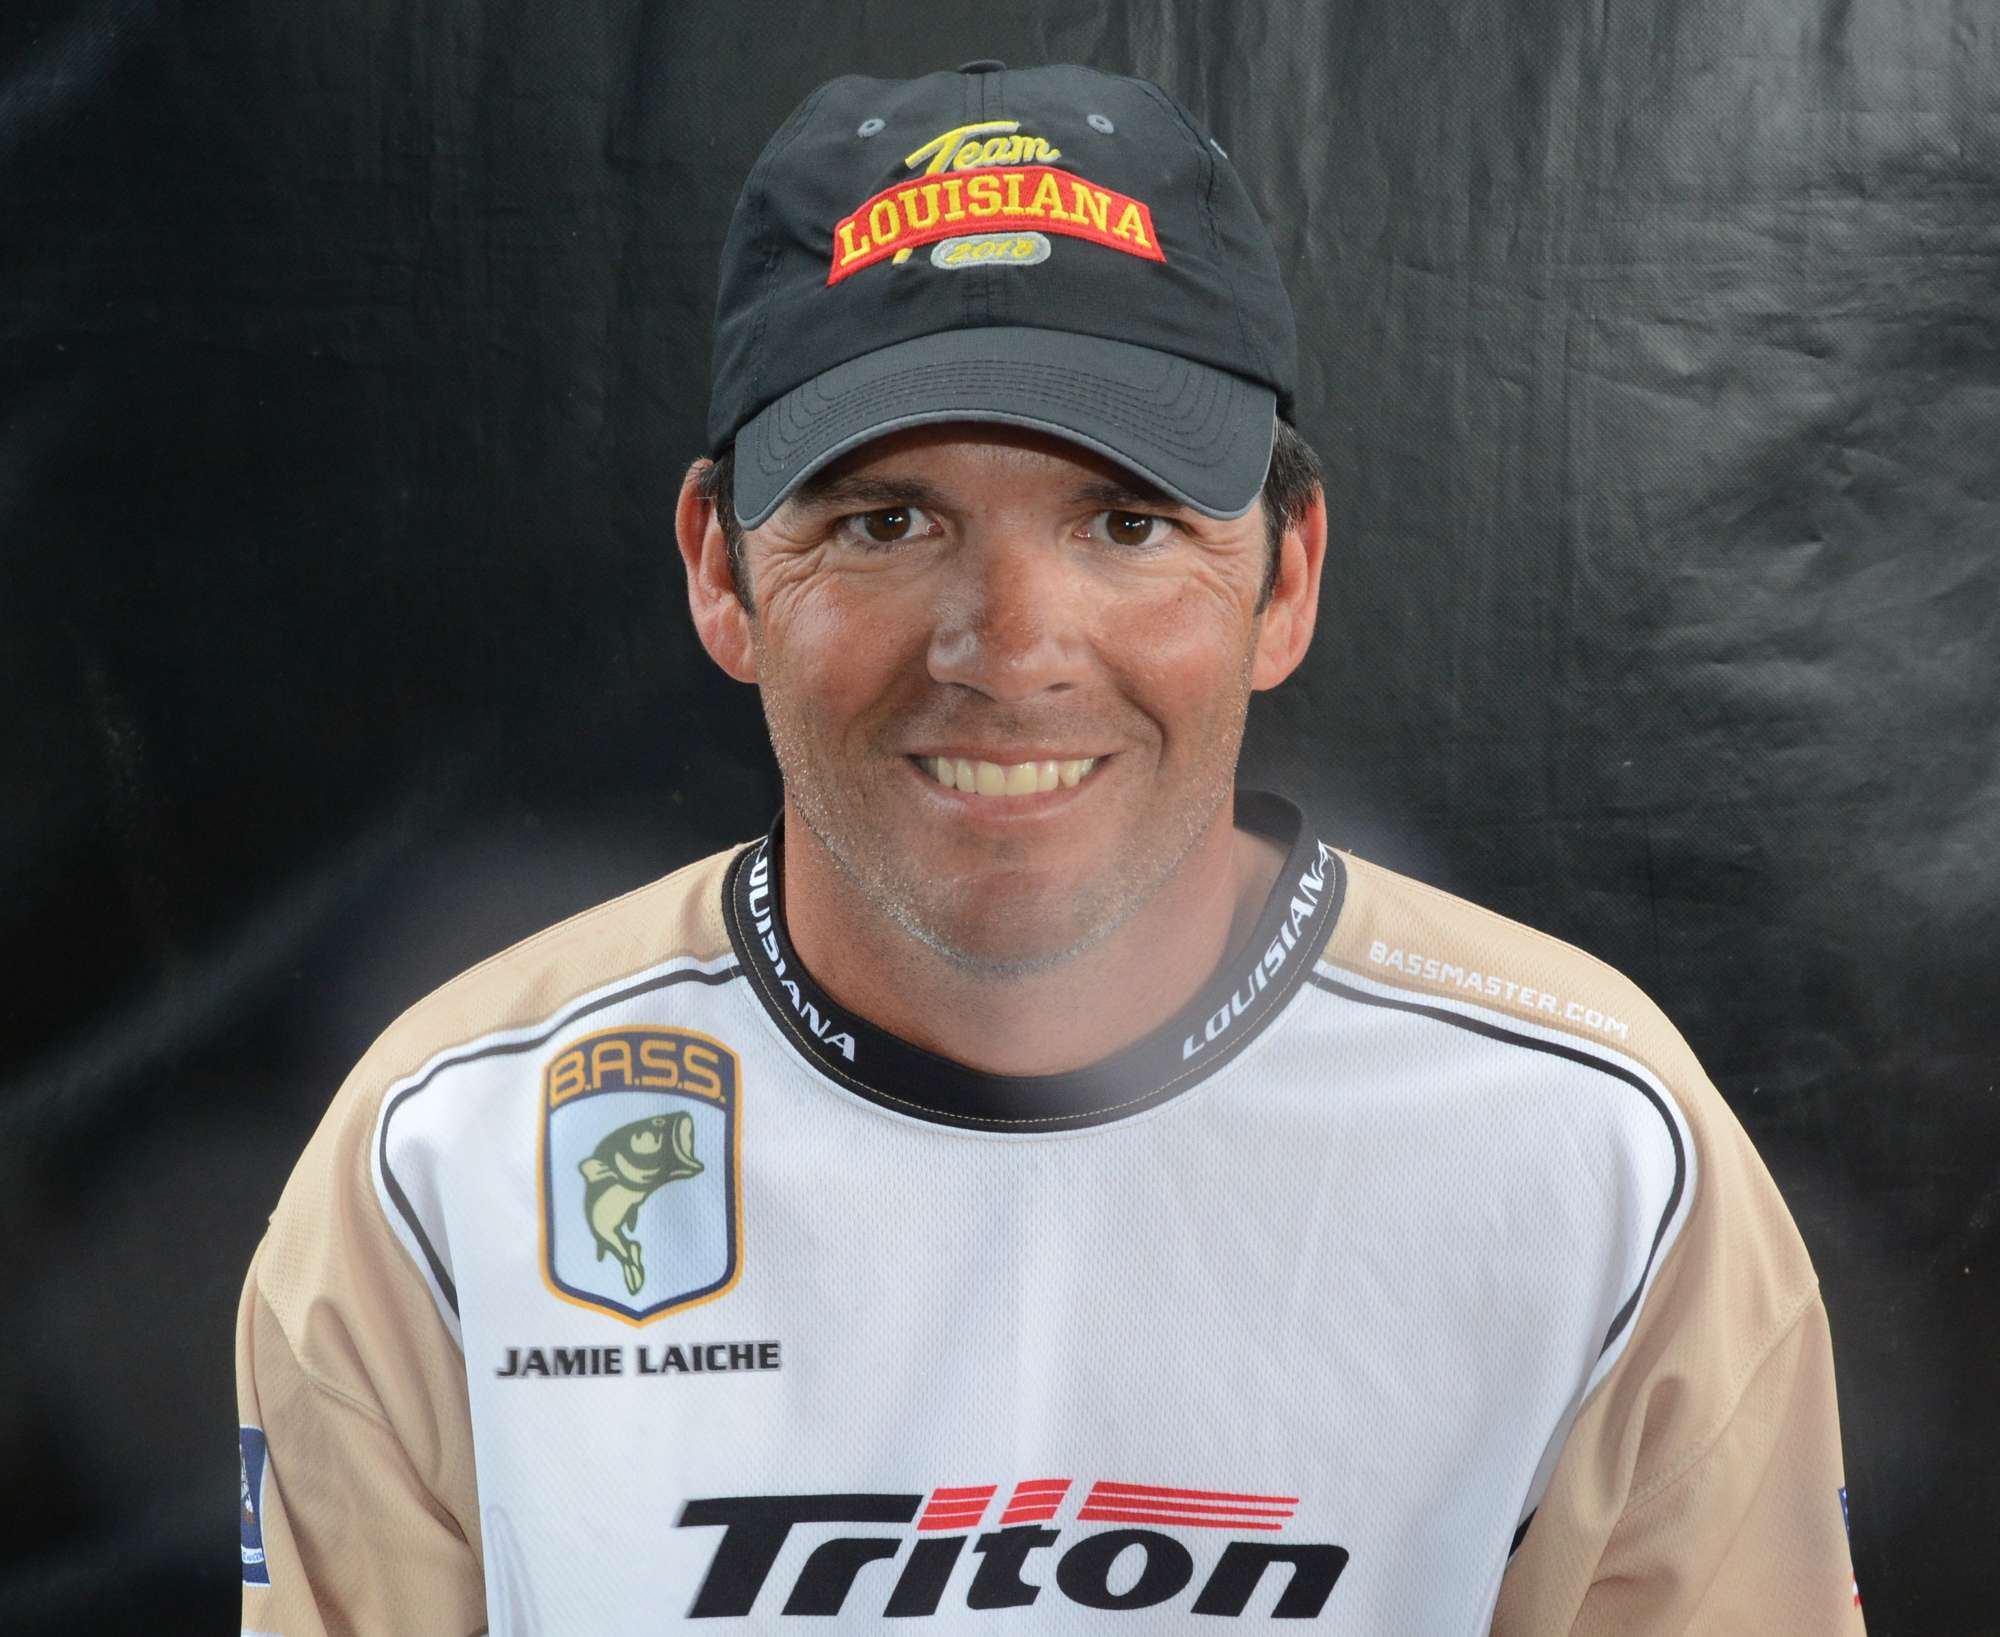 Jamie Laiche has only a four-hour drive to get to the championship, and heâs been to four previous B.A.S.S. Nation Championships. In fact, heâs already qualified for the Classic once, back in 2008. Now, heâs looking for another shot at the biggest title in bass fishing. Laiche is an instrument technician for a chemical company. When heâs not at work, you can find him hunting, cooking or practicing sports with his kids. Laiche is a member of the Ascension Area Anglers in Louisiana.